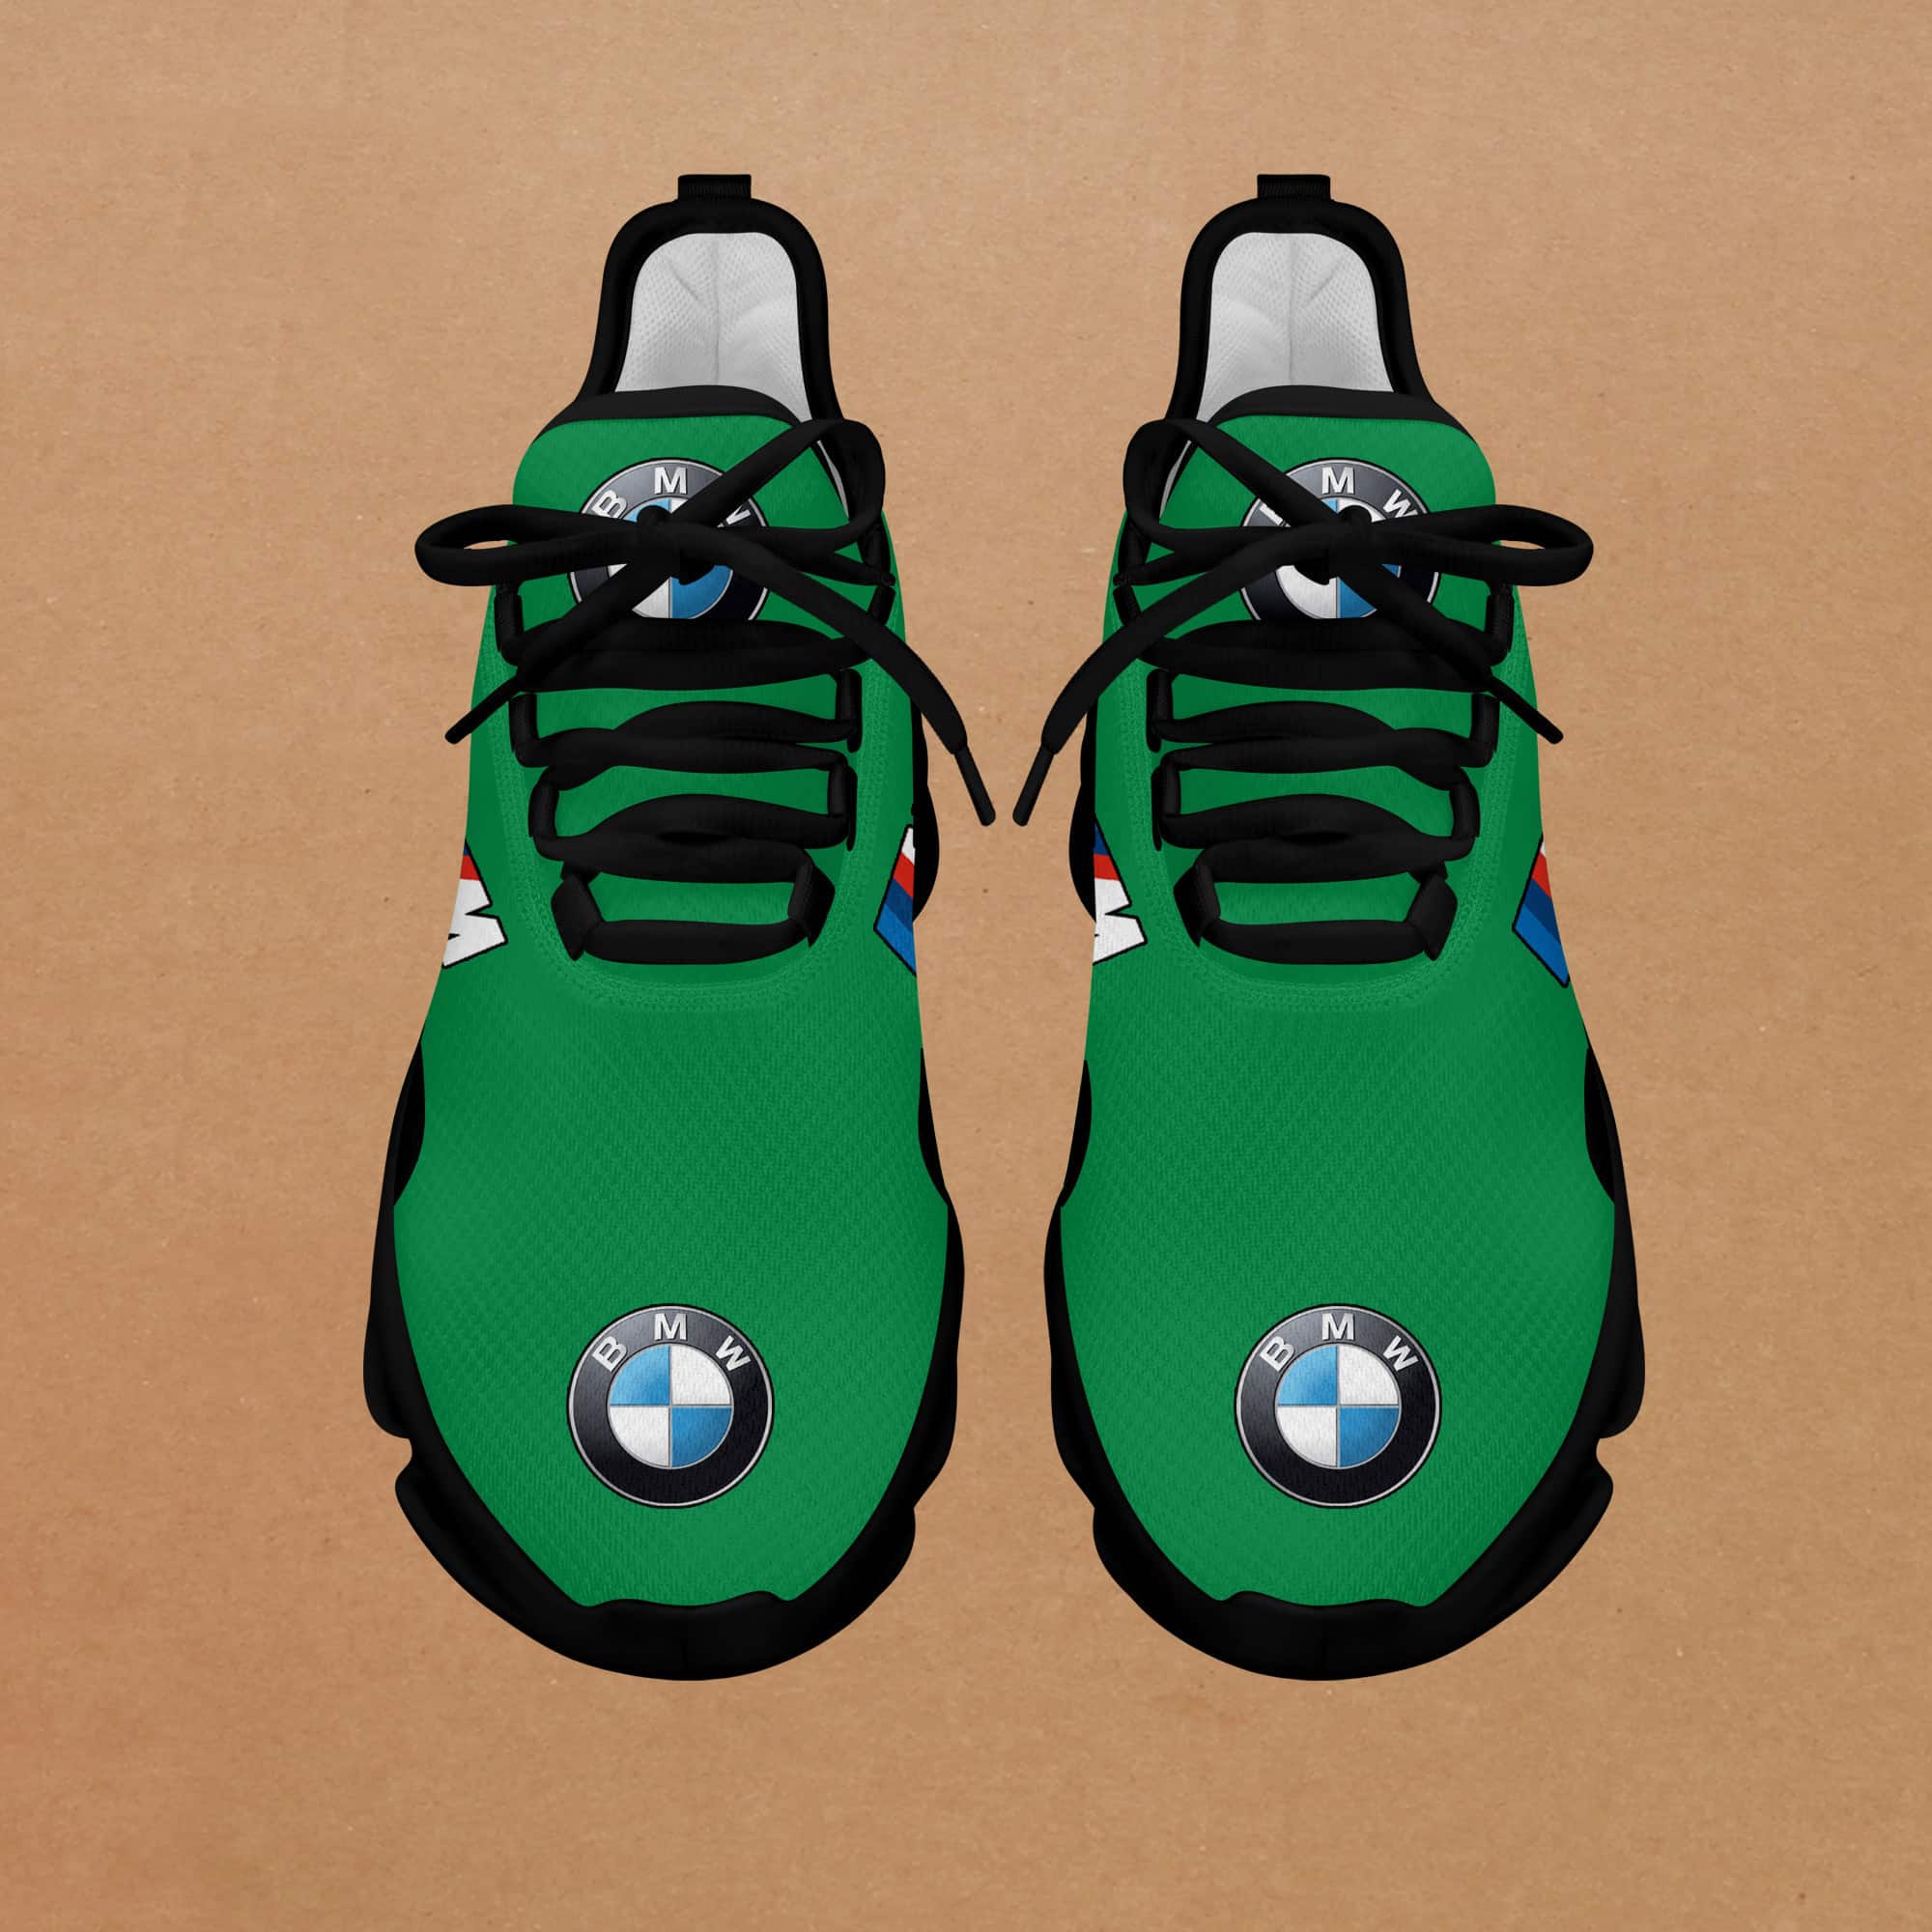 Bmw M Running Shoes Max Soul Shoes Sneakers Ver 4 4